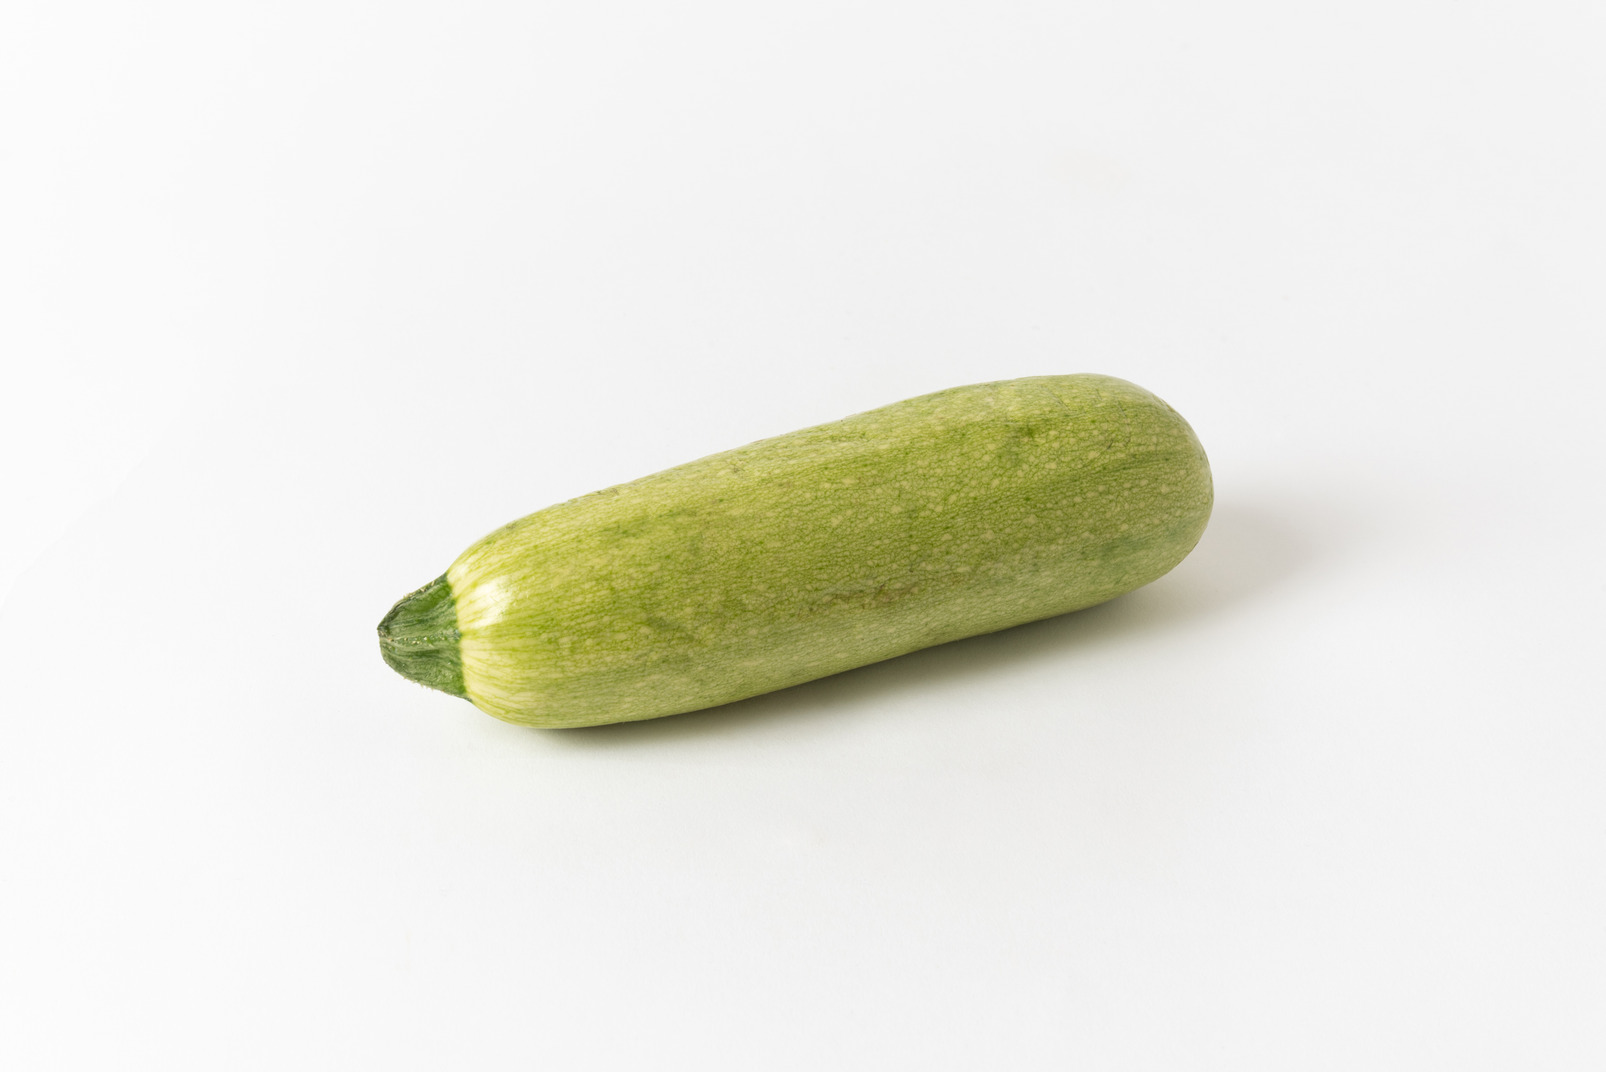 Zucchini can be used for so many dishes